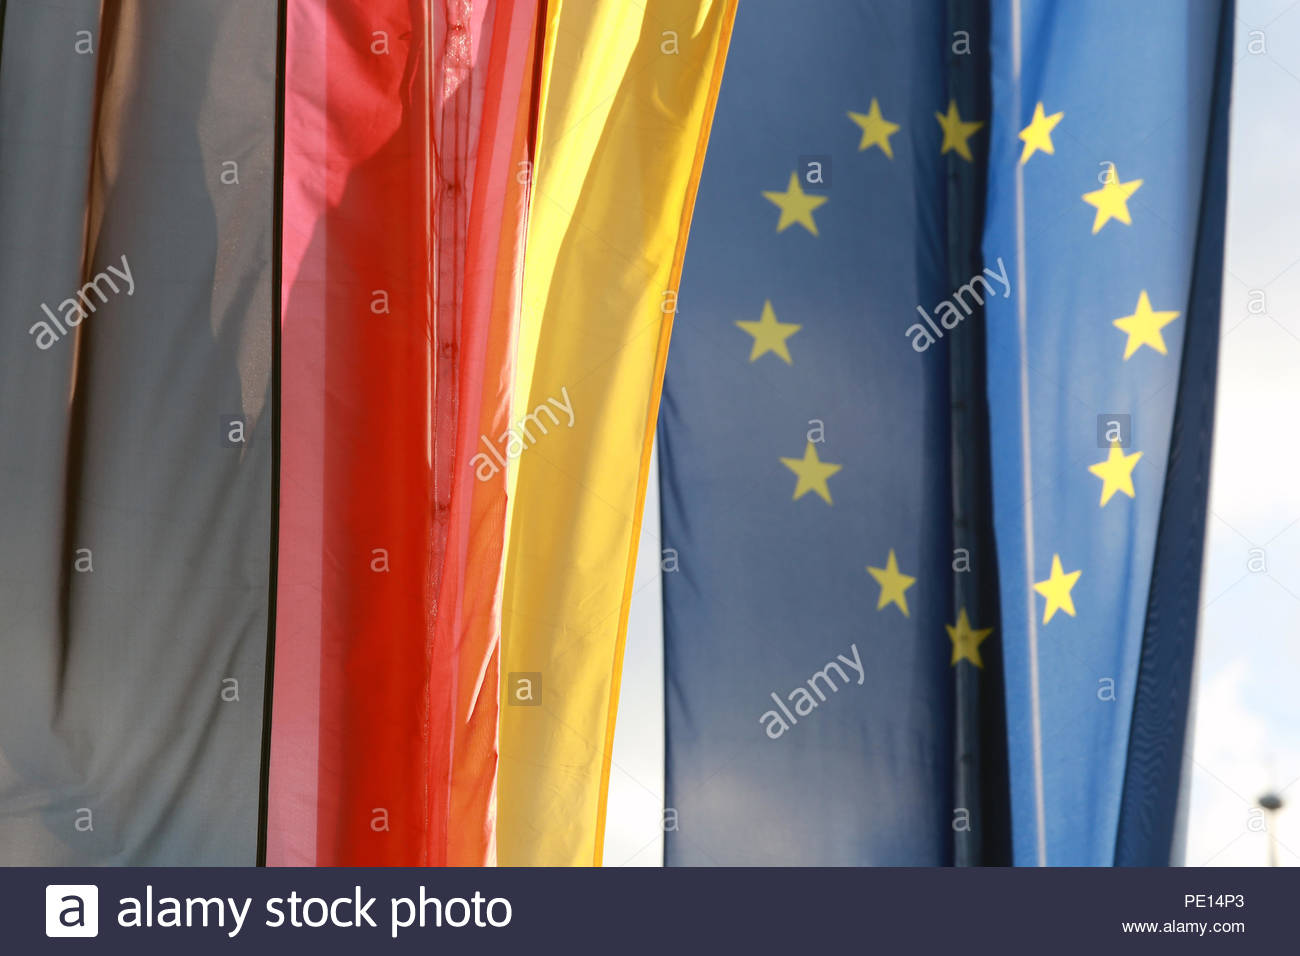 The EU and German flags hang side by side in Coburg, Germany Stock Photo